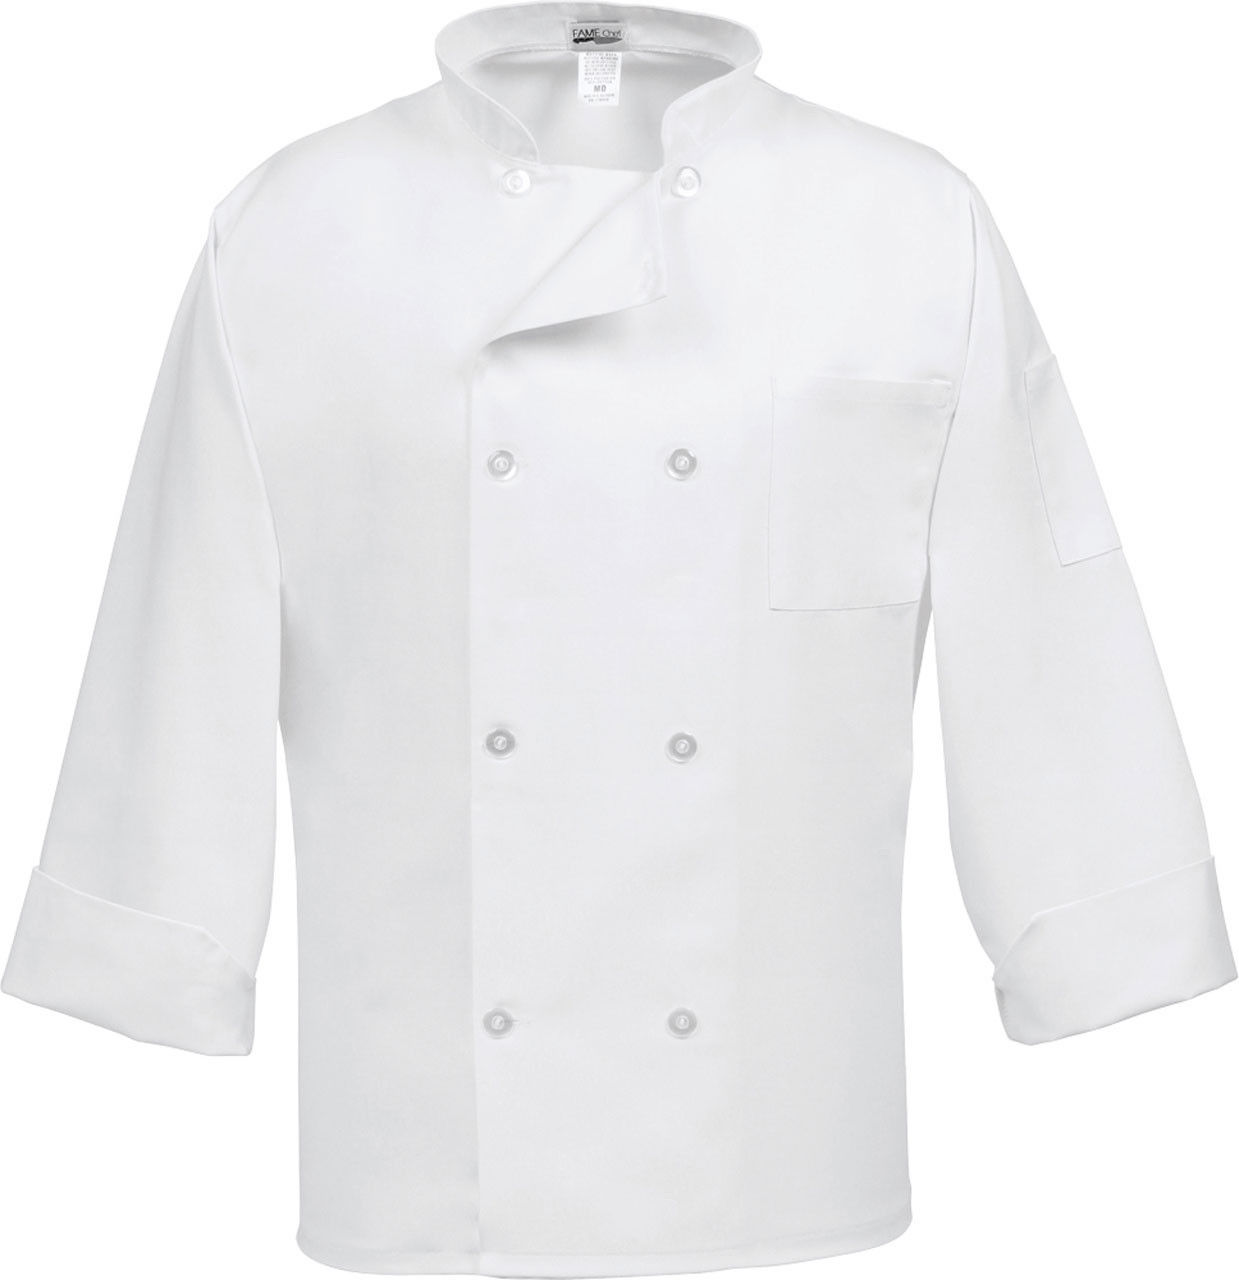 Is the chef coat button left or right on the cuffs?